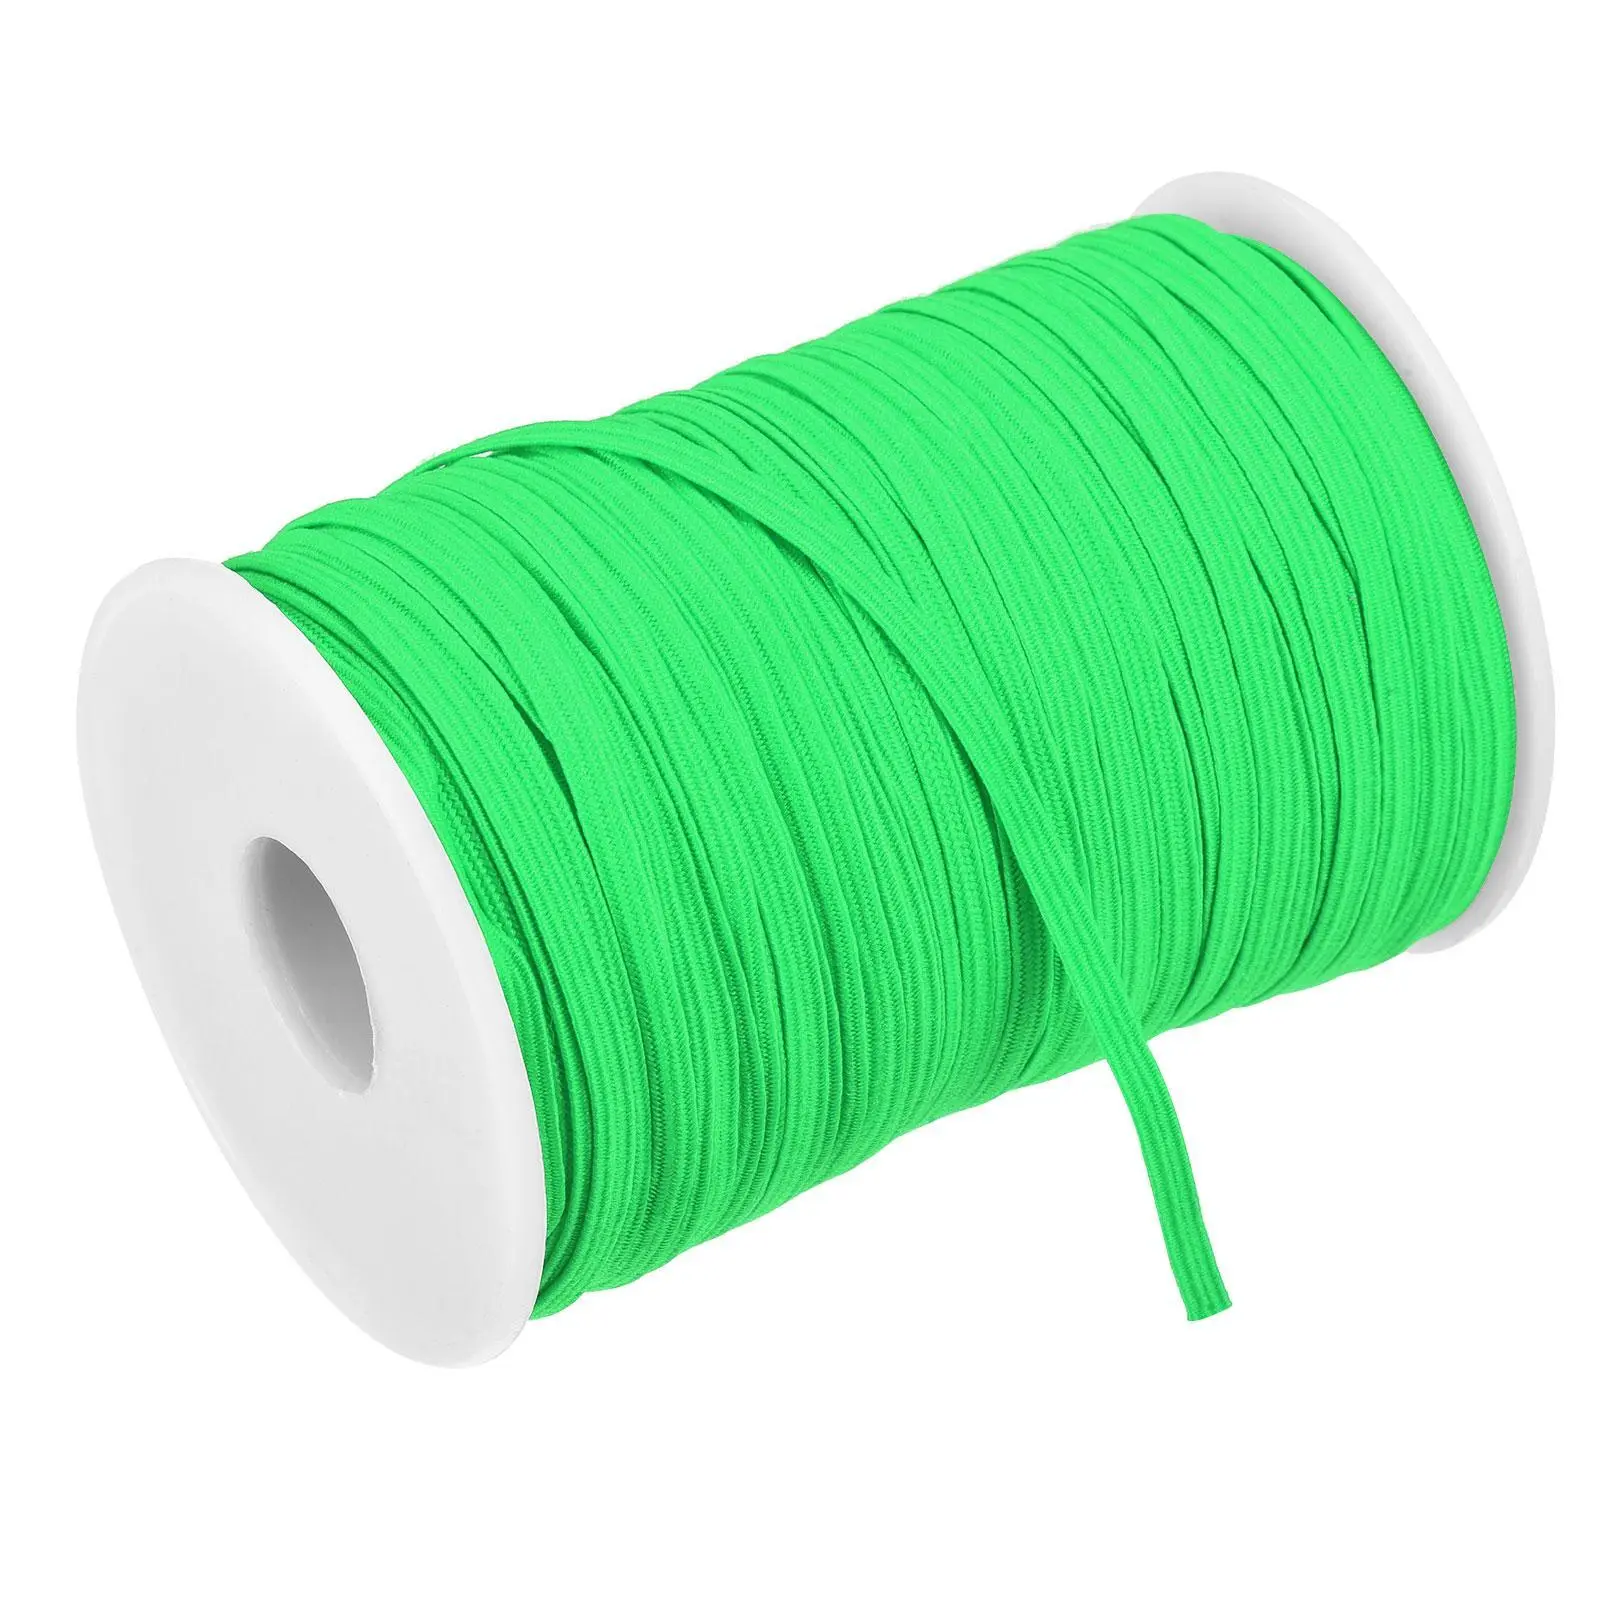 Flat Elastic Band For Sewing 1/8" X 109 Yards Bright Green Stretch Strap Roll